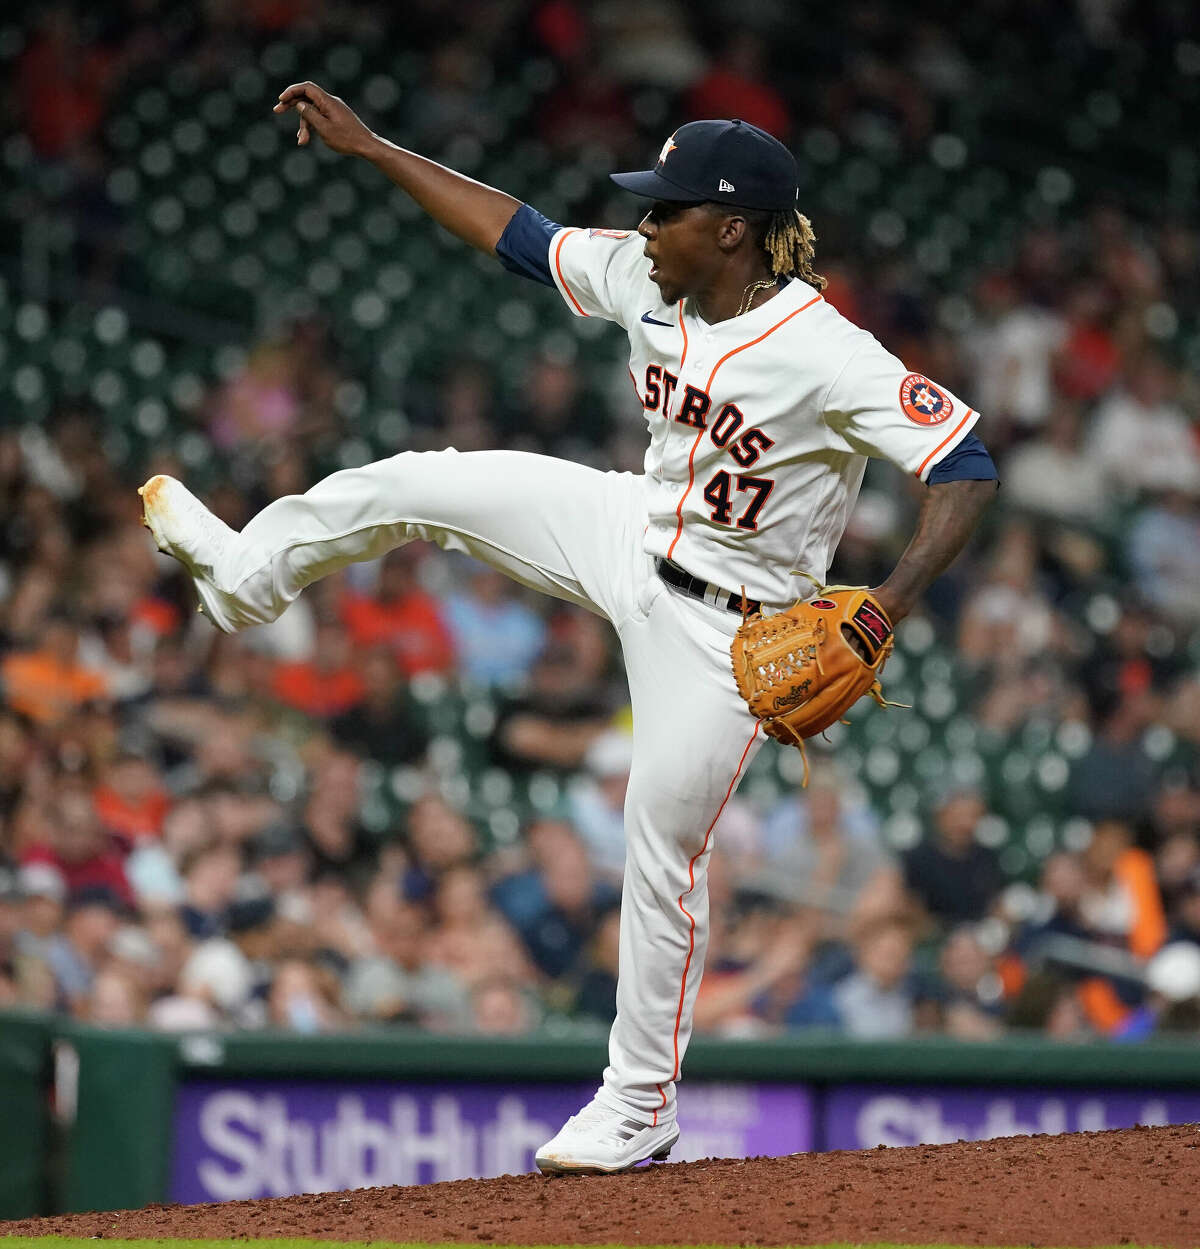 Houston Astros relief pitcher Rafael Montero (47) strikes out Detroit Tigers Akil Baddoo during the eighth inning of an MLB baseball game at Minute Maid Park on Thursday, May 5, 2022 in Houston.